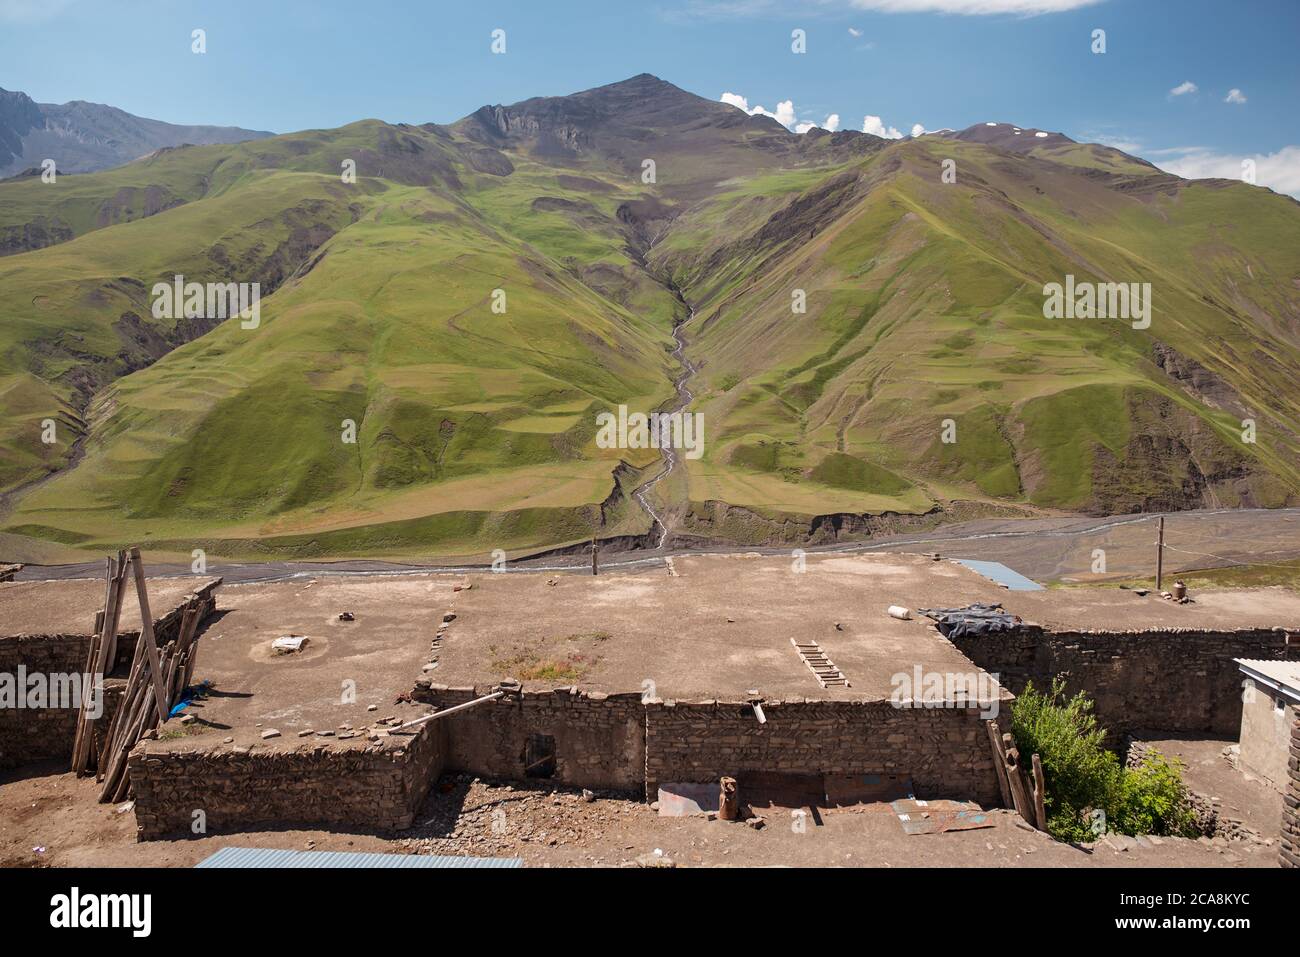 Xinaliq / Azerbaijan - July 8, 2019: scenic view of mountain village with beautiful Caucasus mountains in the background Stock Photo